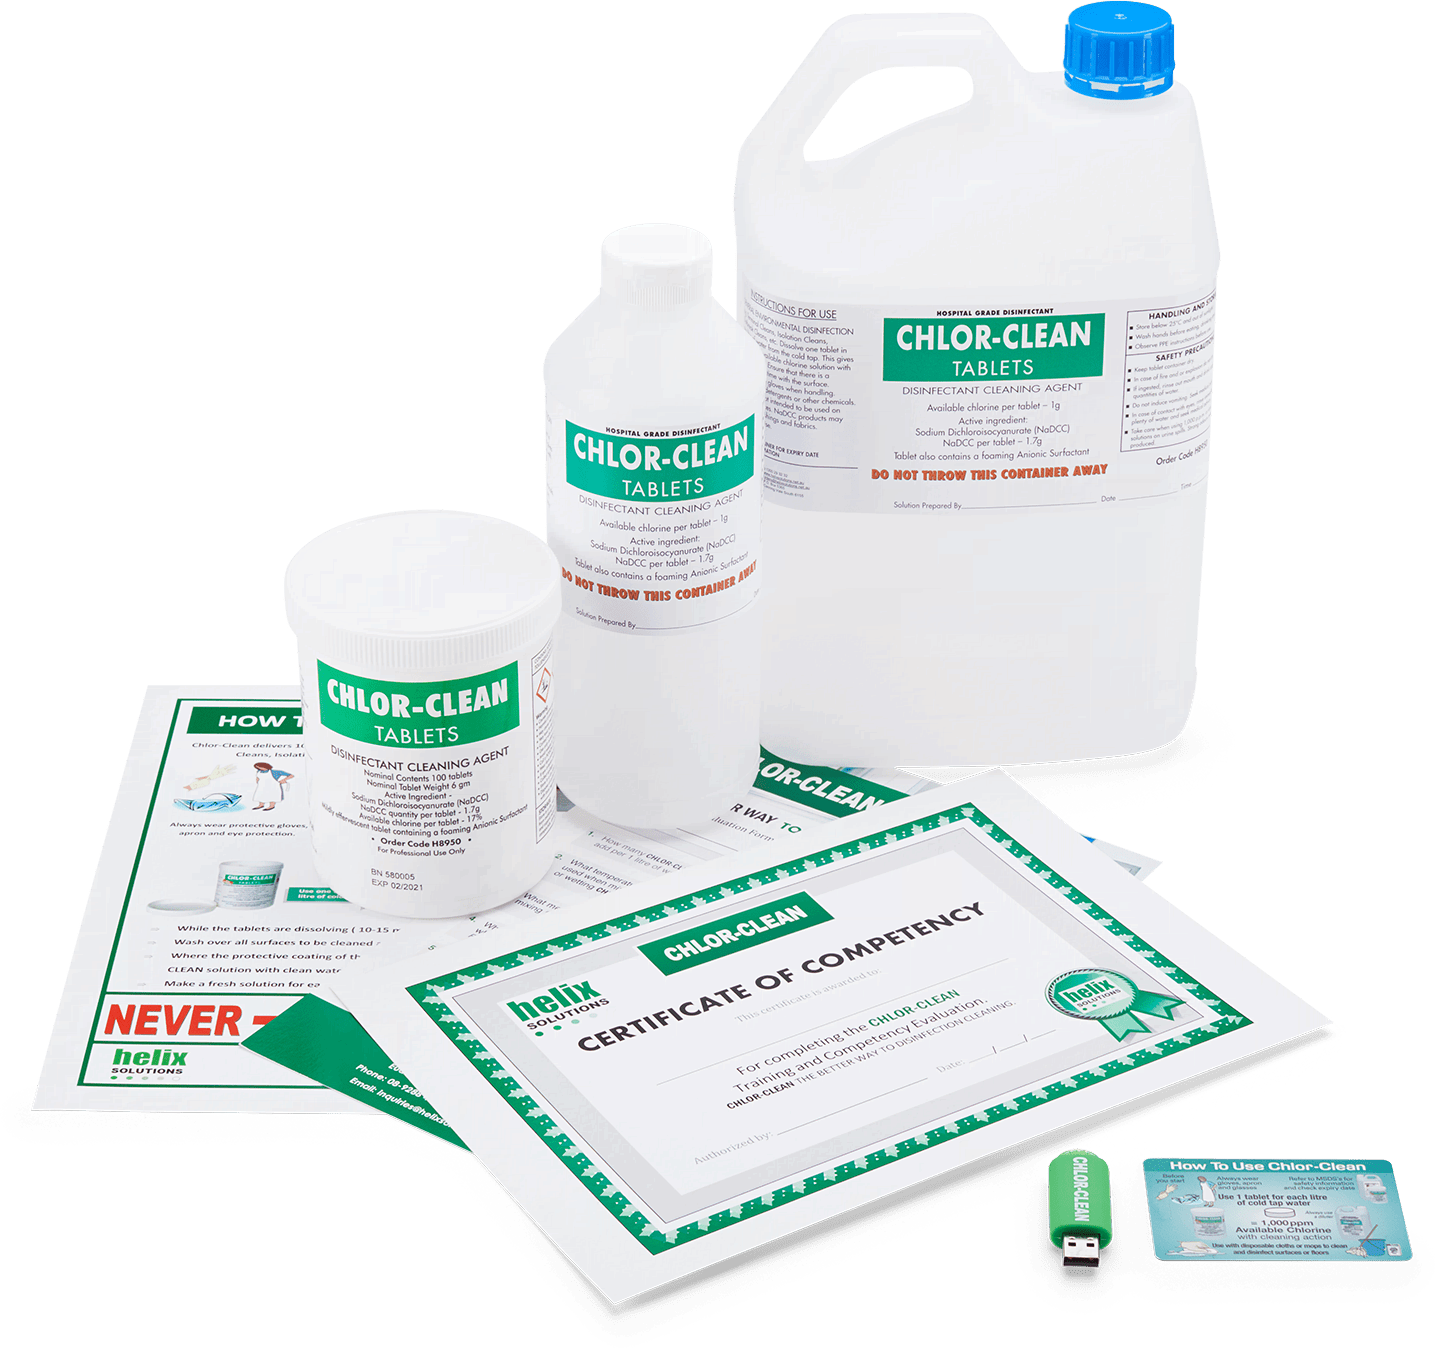 Chlor-Clean Hospital Grade Disinfectant | Helix Solutions